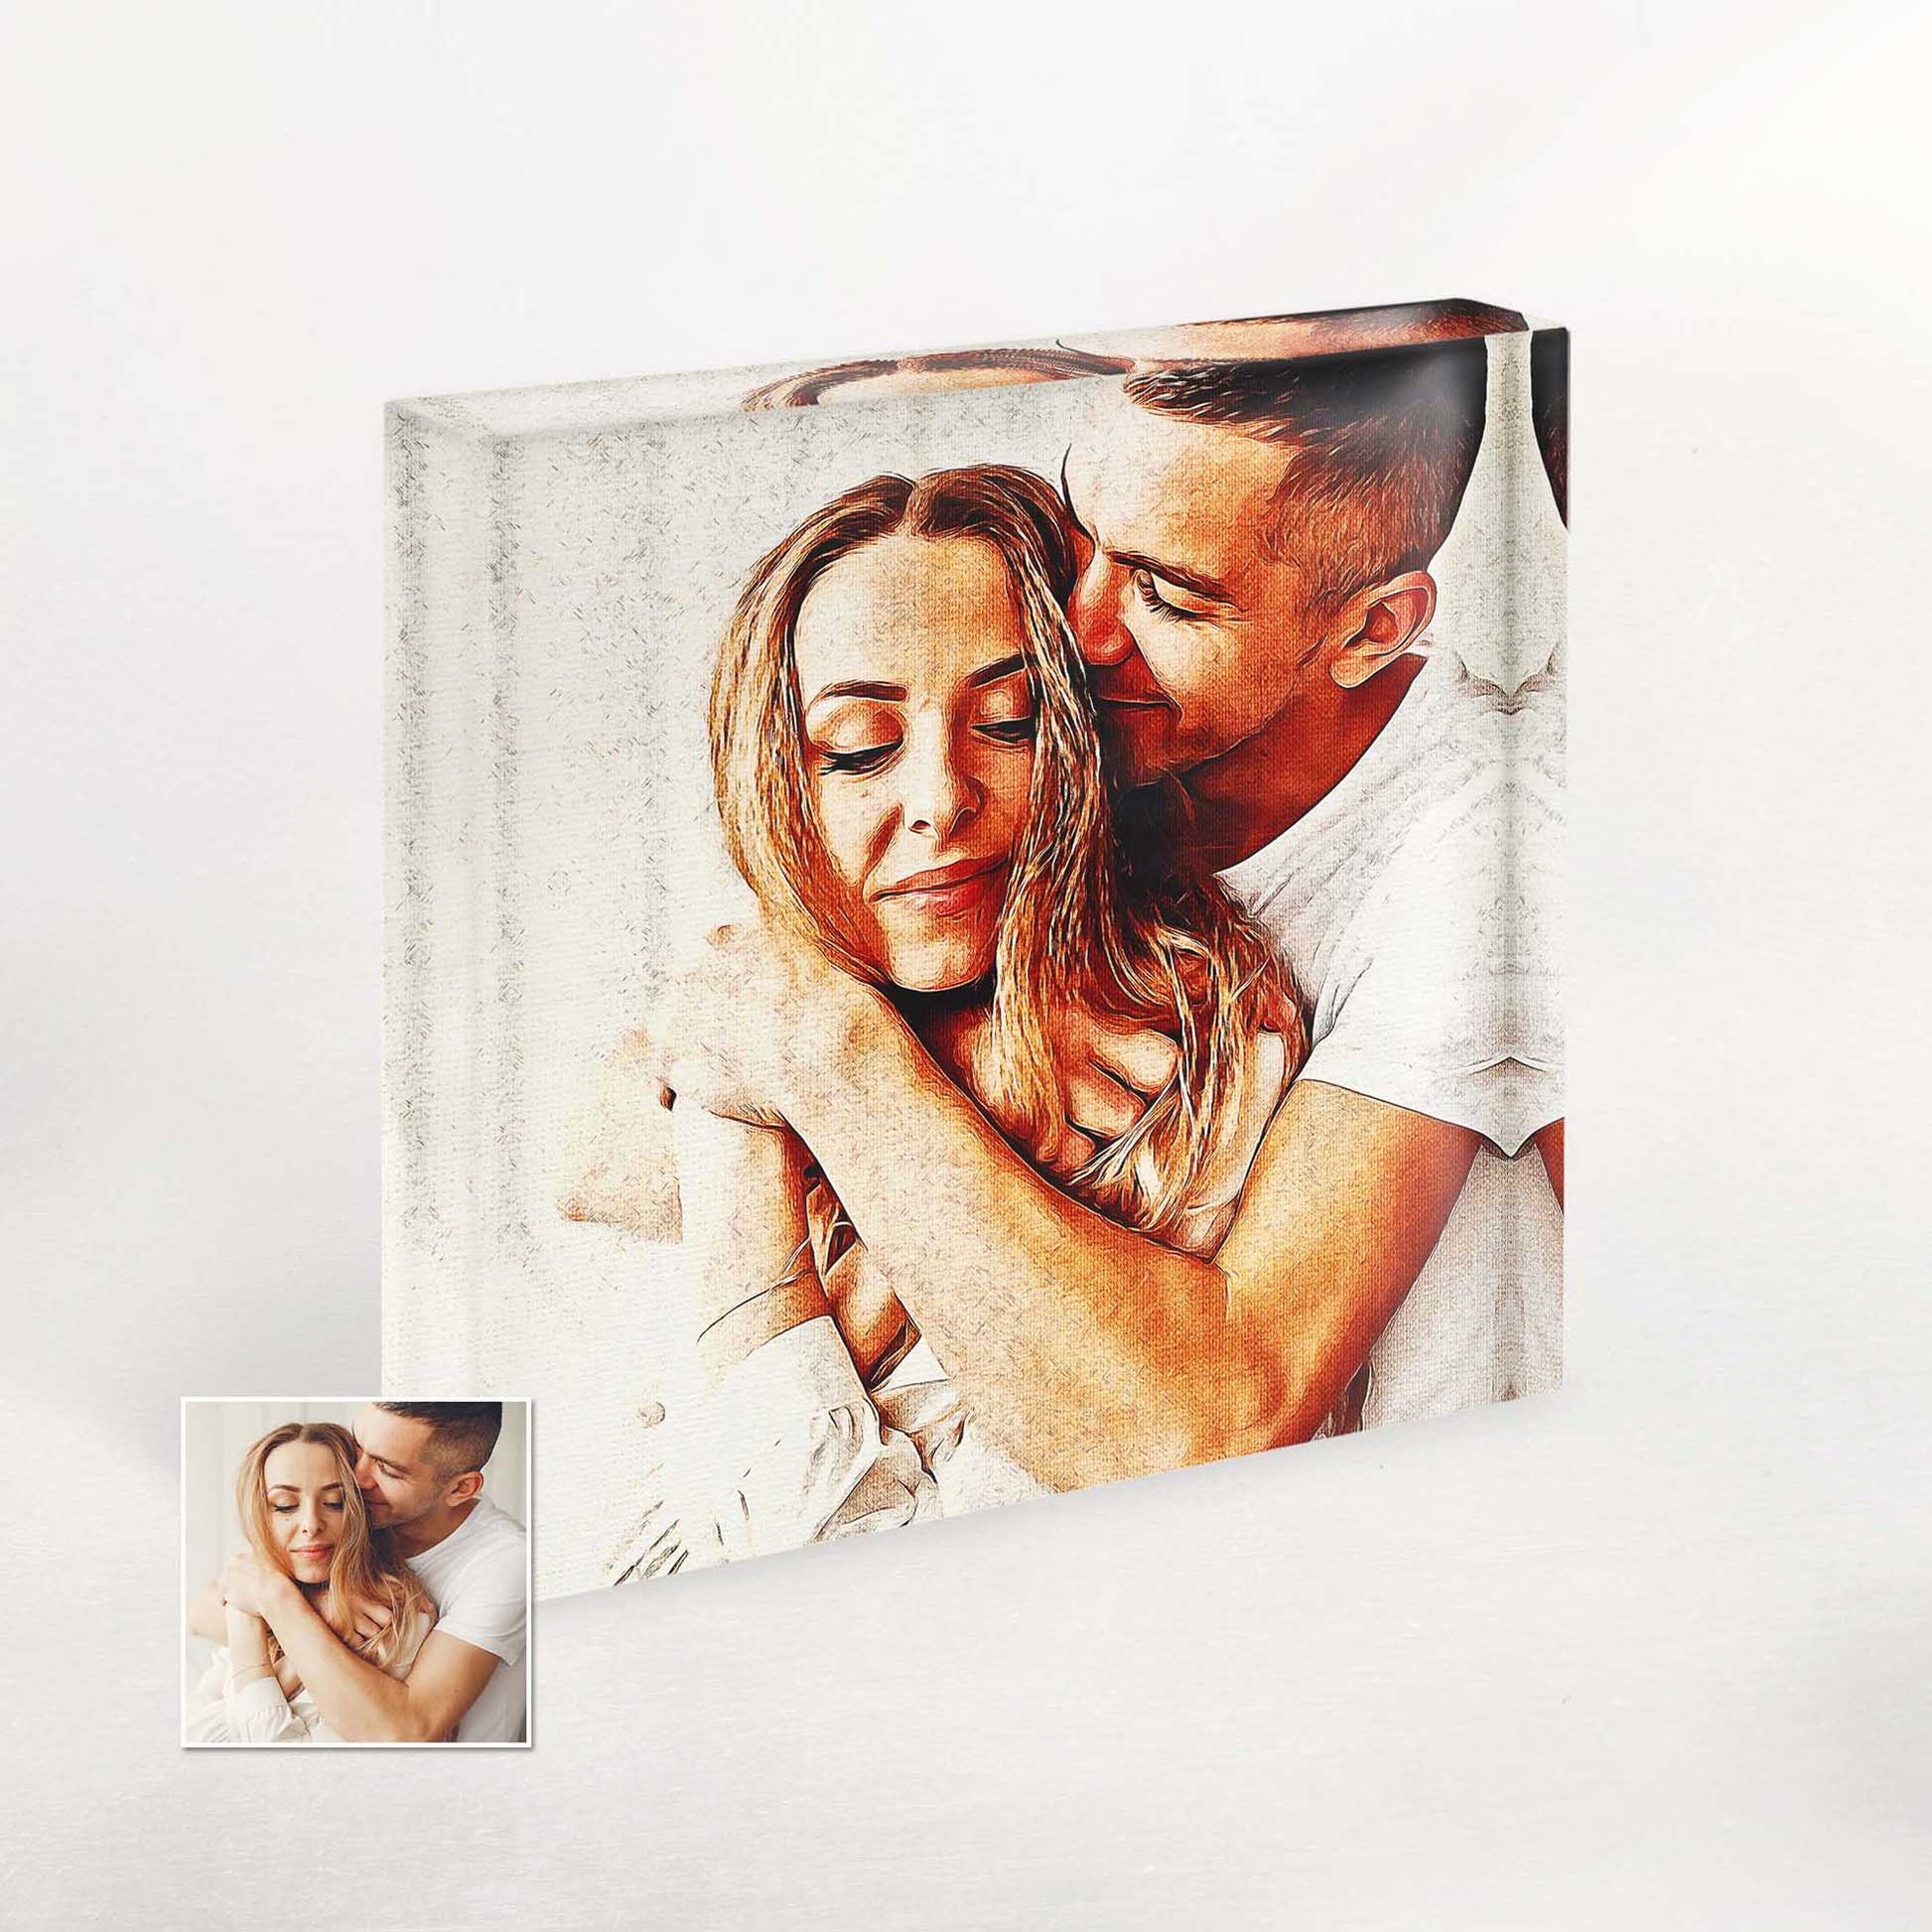 Statement Anniversary Gift: Personalized Original Oil Painting Acrylic Block Photo: Make a lasting impression with a gift that speaks volumes. The original oil painting created from your photo is a bold statement